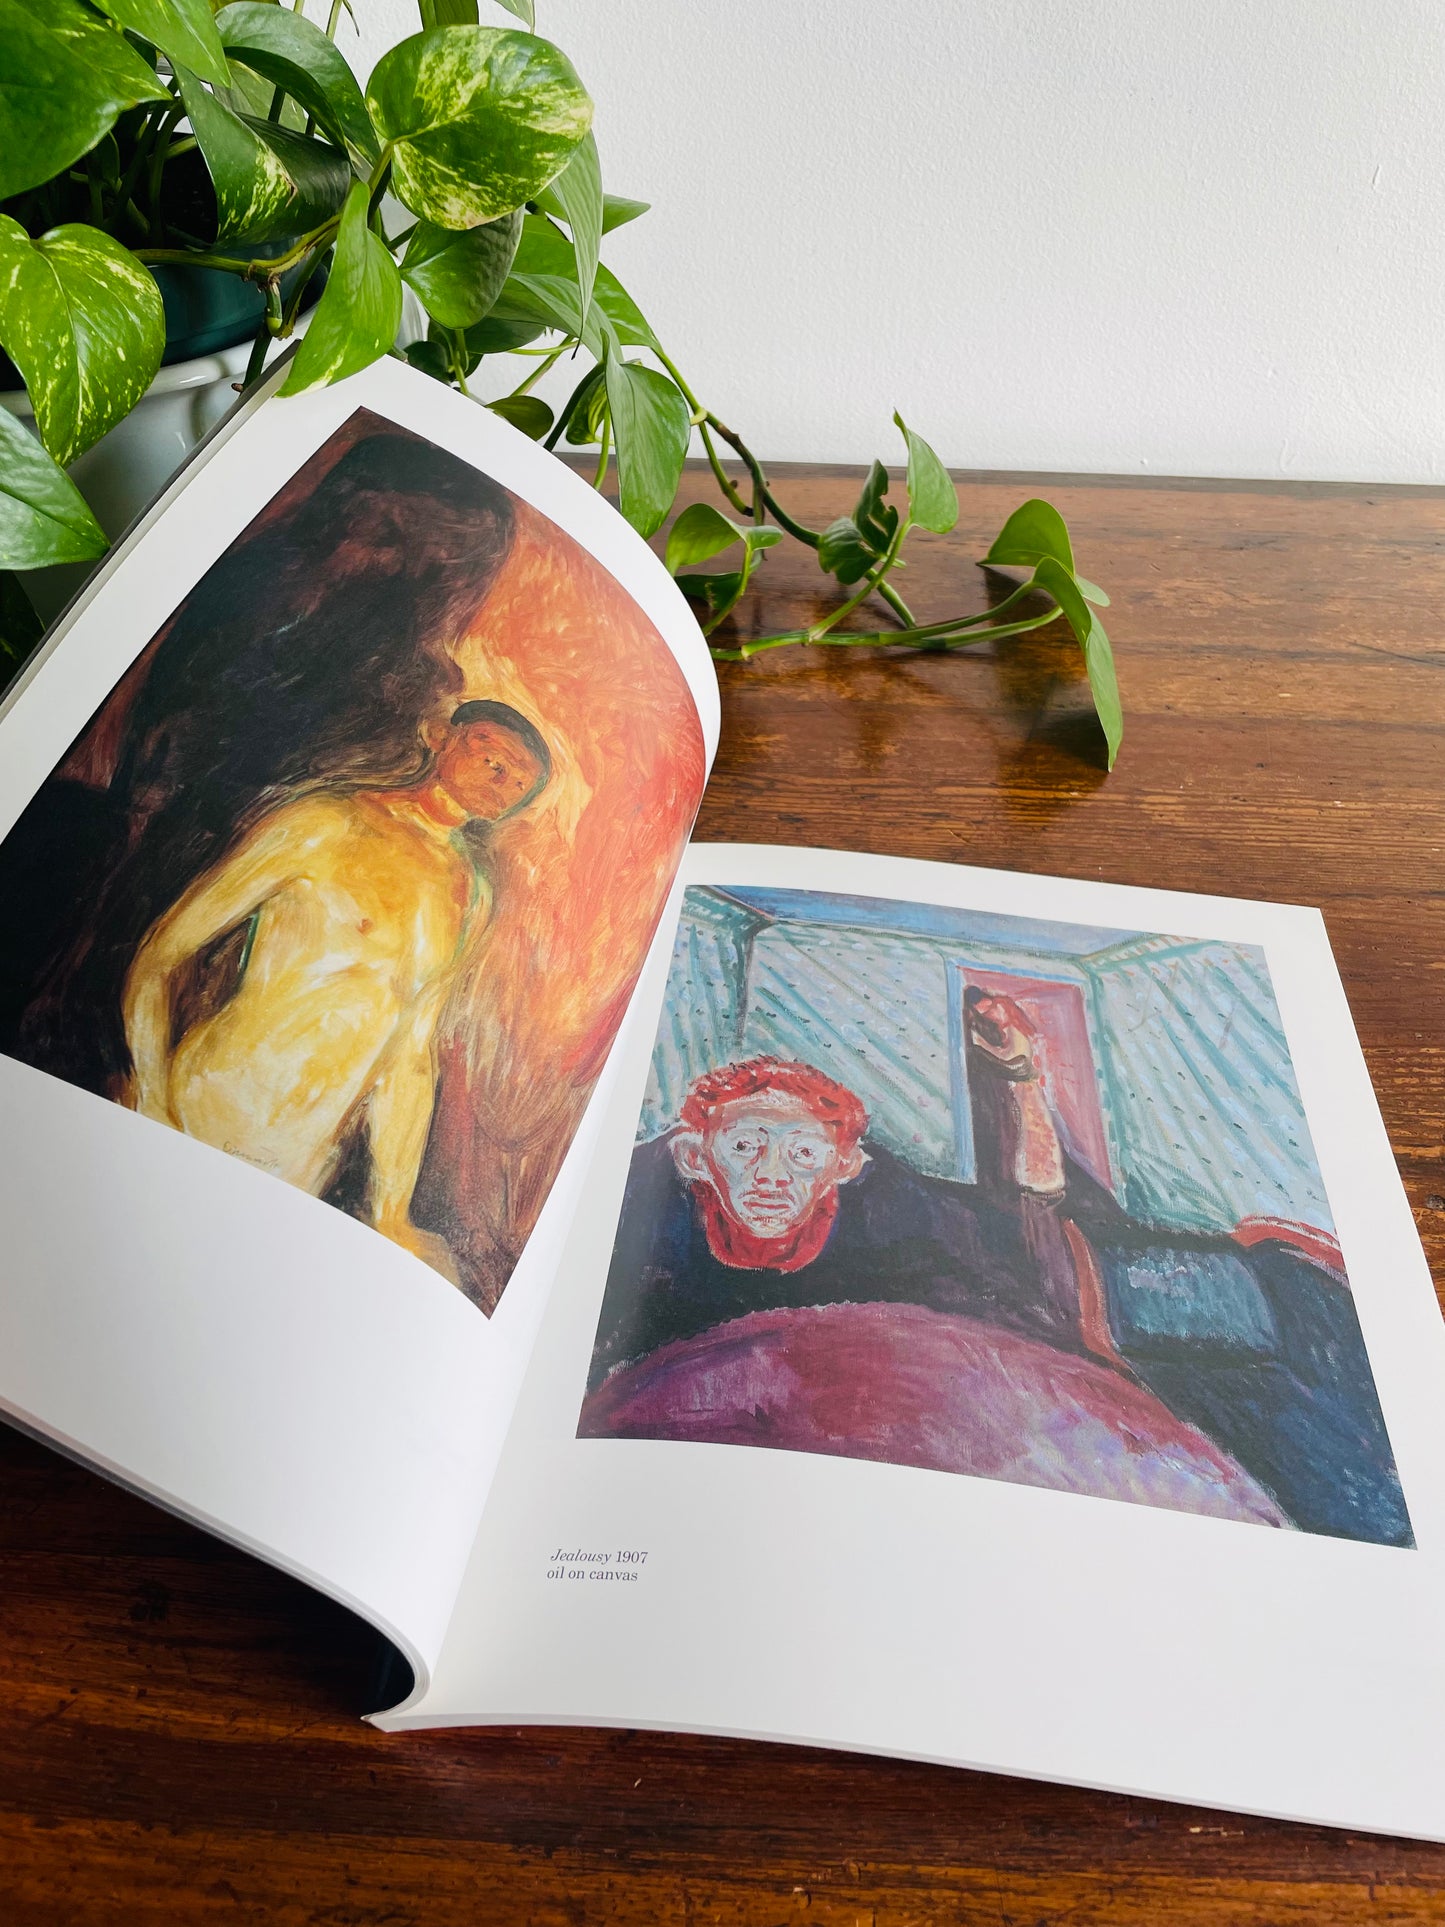 Edvard Munch Art Exhibition Book - Vancouver Art Gallery May 31 to August 4 (1986)